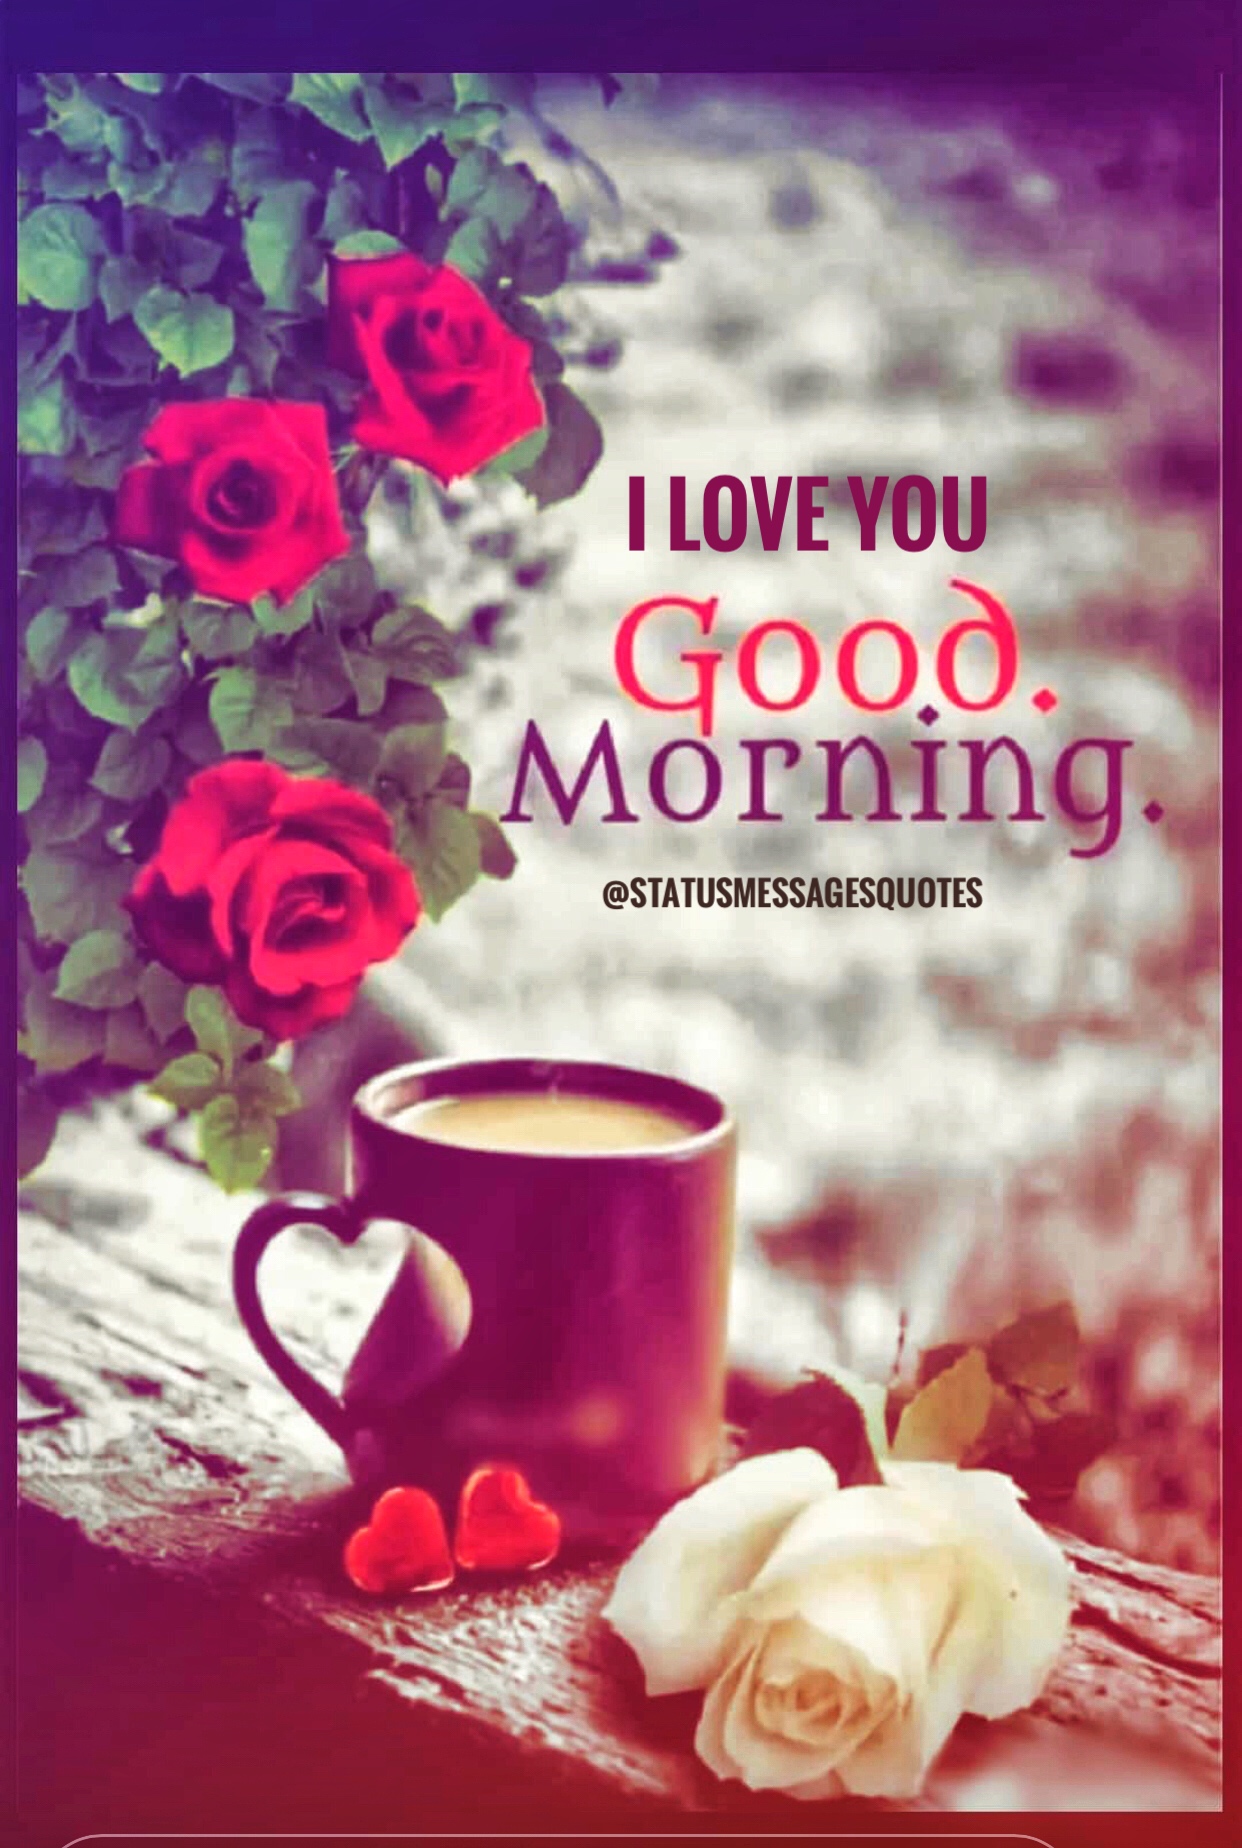 Best Good Morning Status for Love, Friends and Family